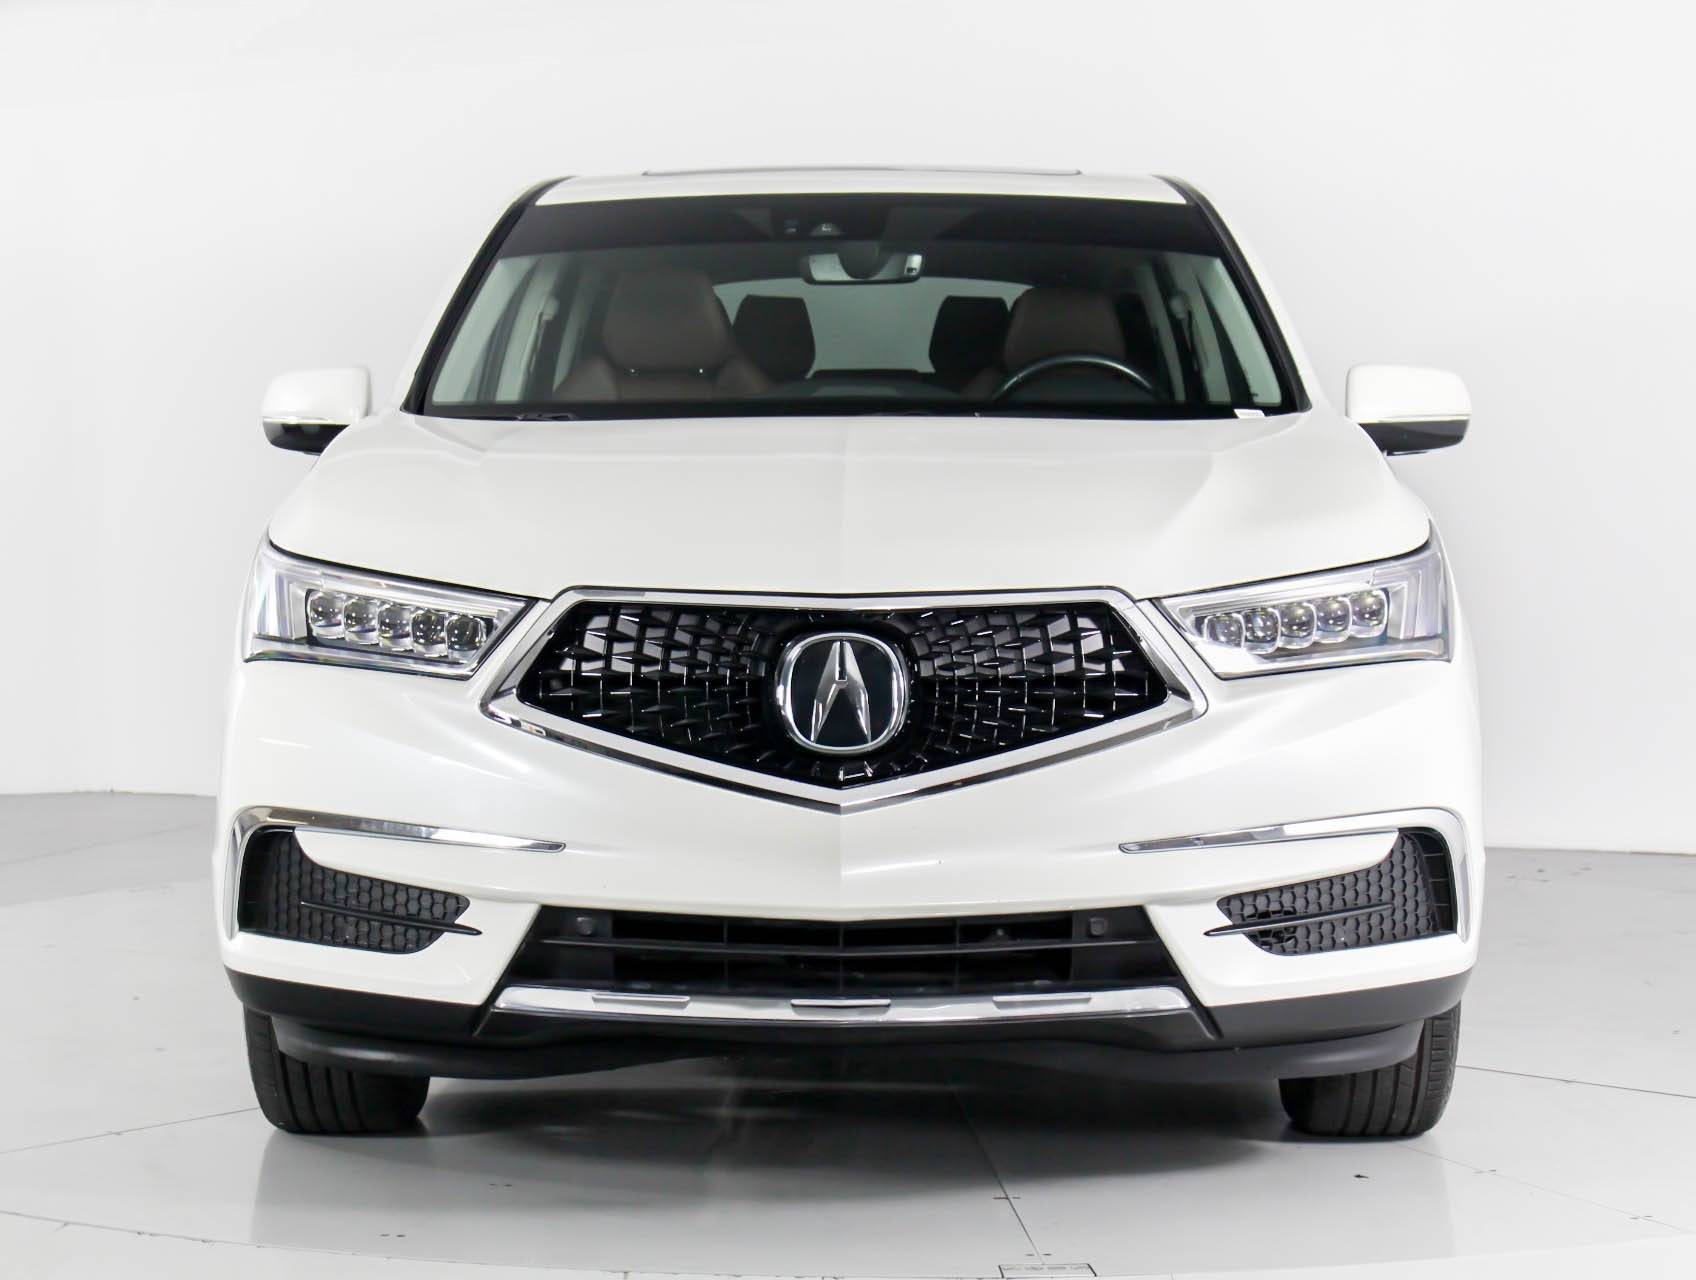 Florida Fine Cars - Used ACURA MDX 2017 MIAMI TECHNOLOGY PACKAGE